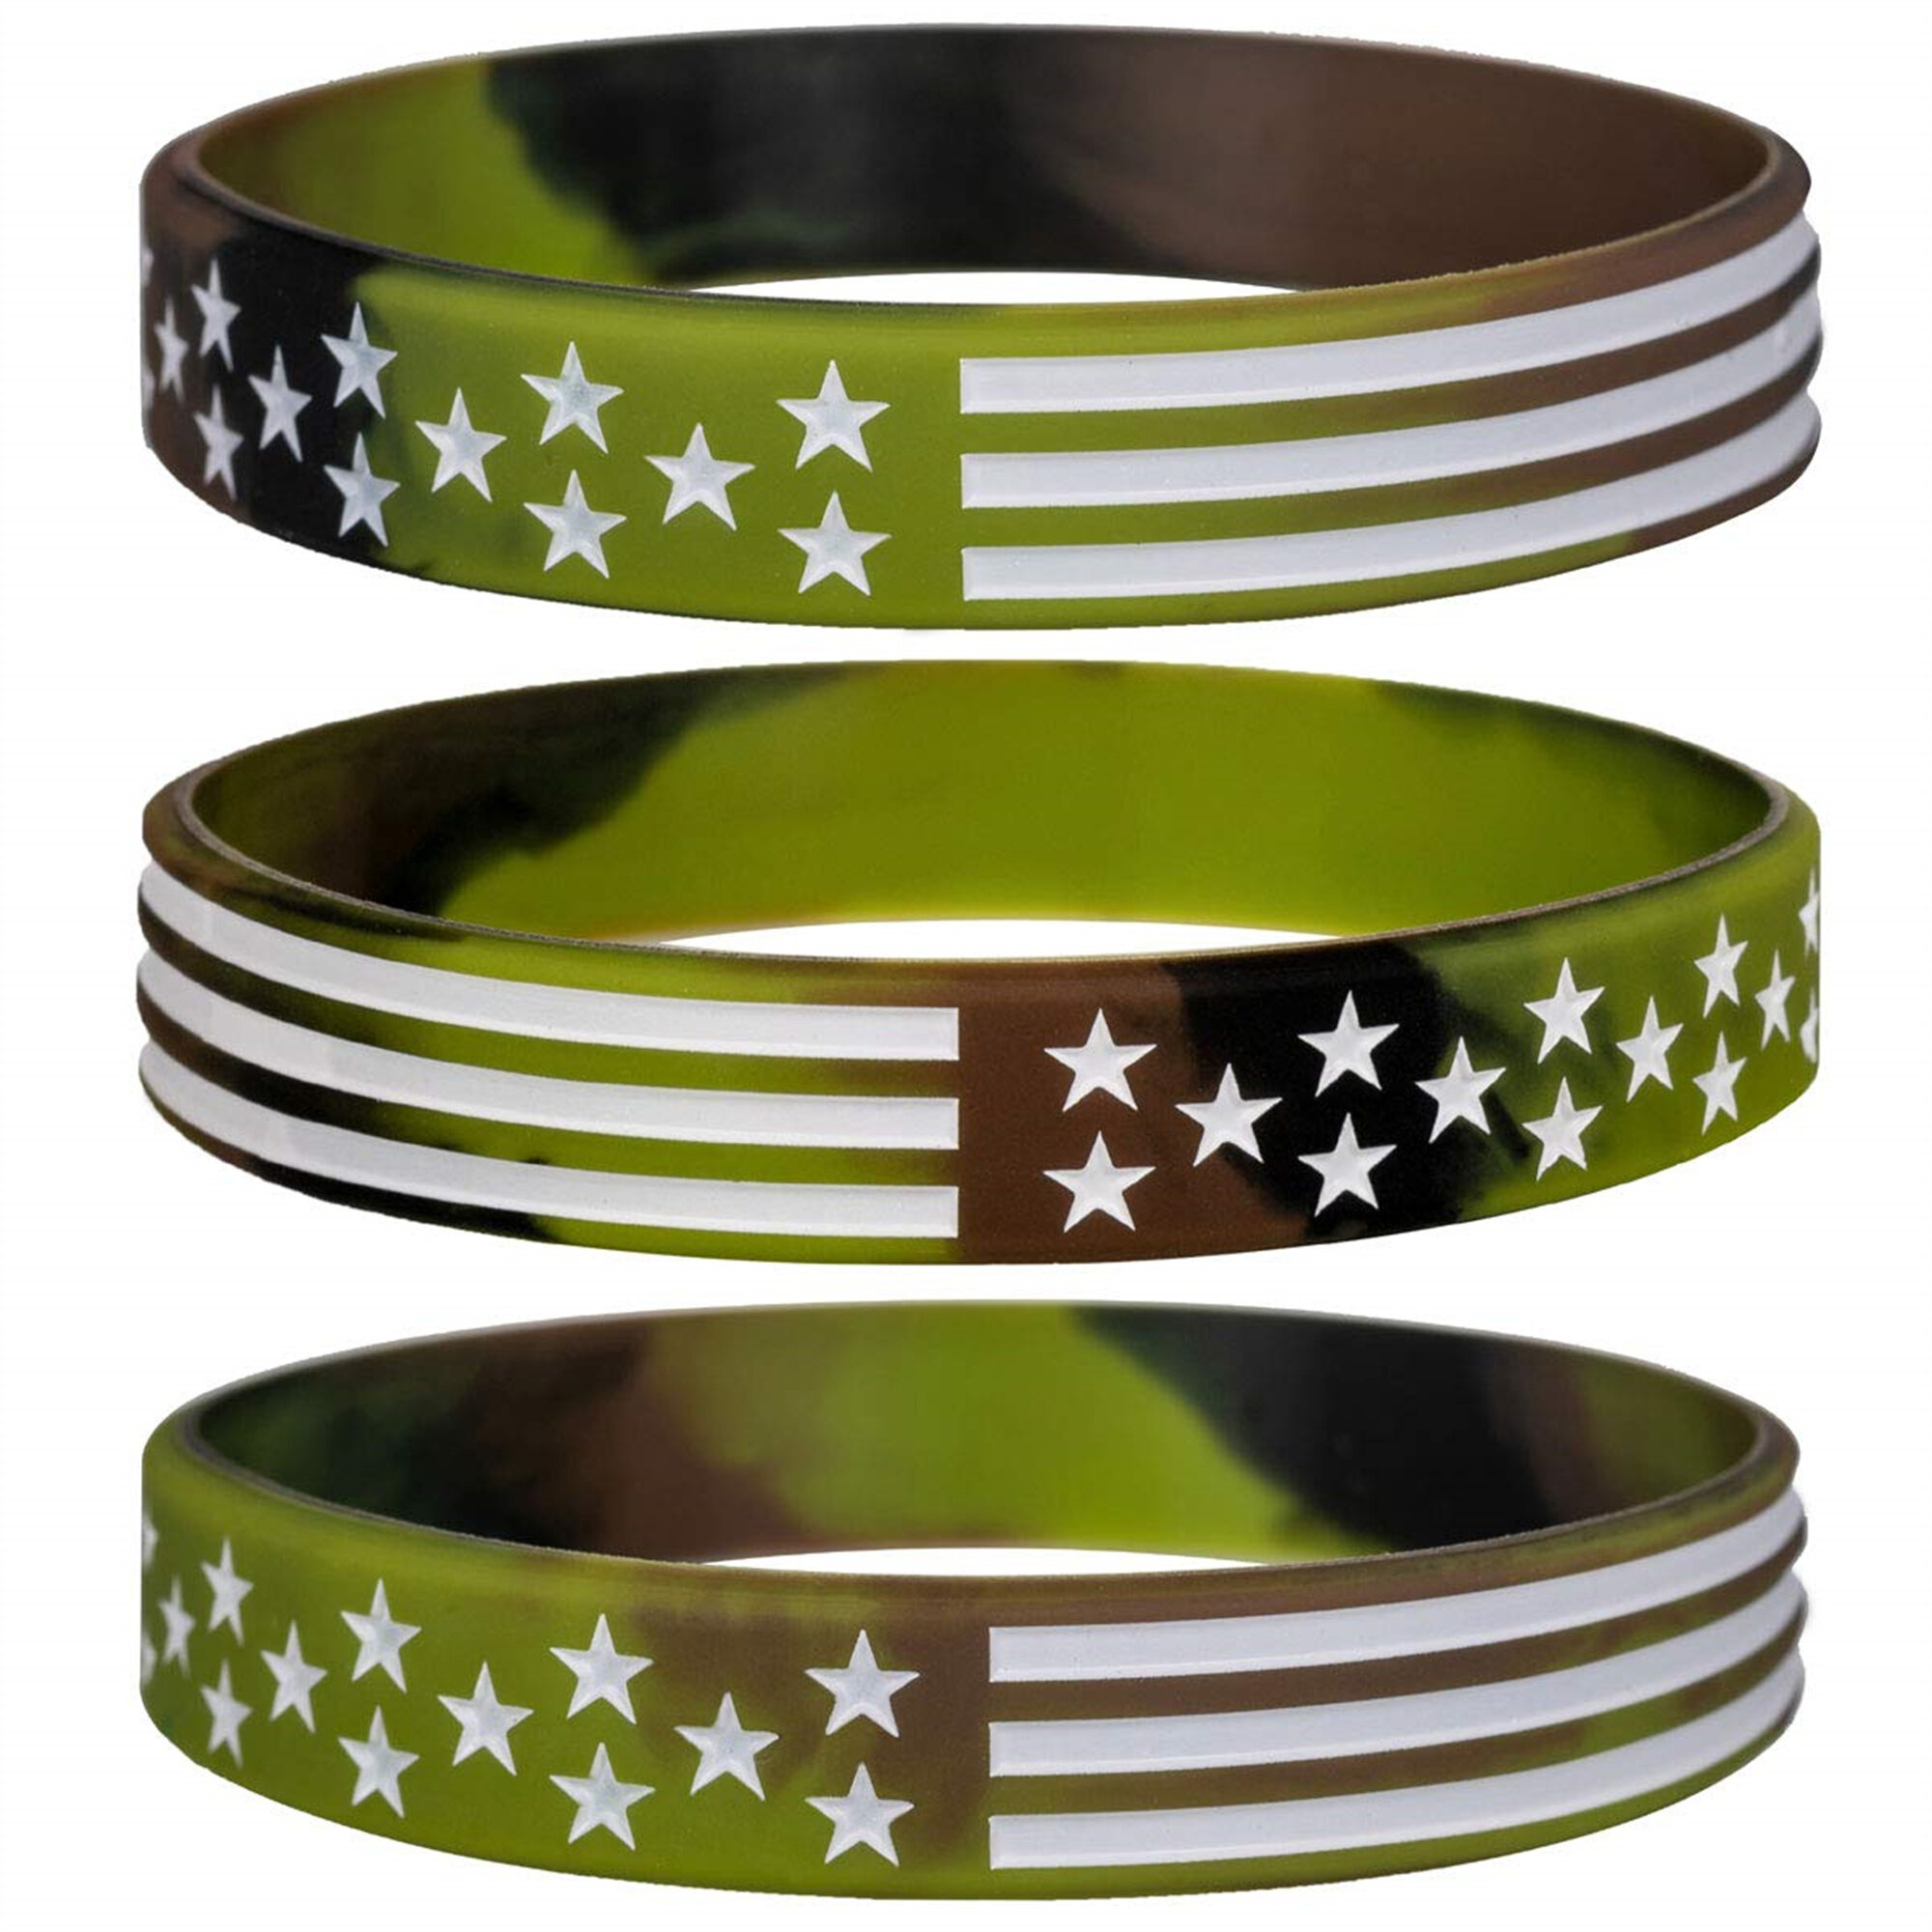 Sainstone Military Army Silicone Bracelets with American Flag Sport Fans Air Force Camouflage & Navy Camo Rubber Wristbands Gifts for Deploy to Europe for Patriots Soldier 